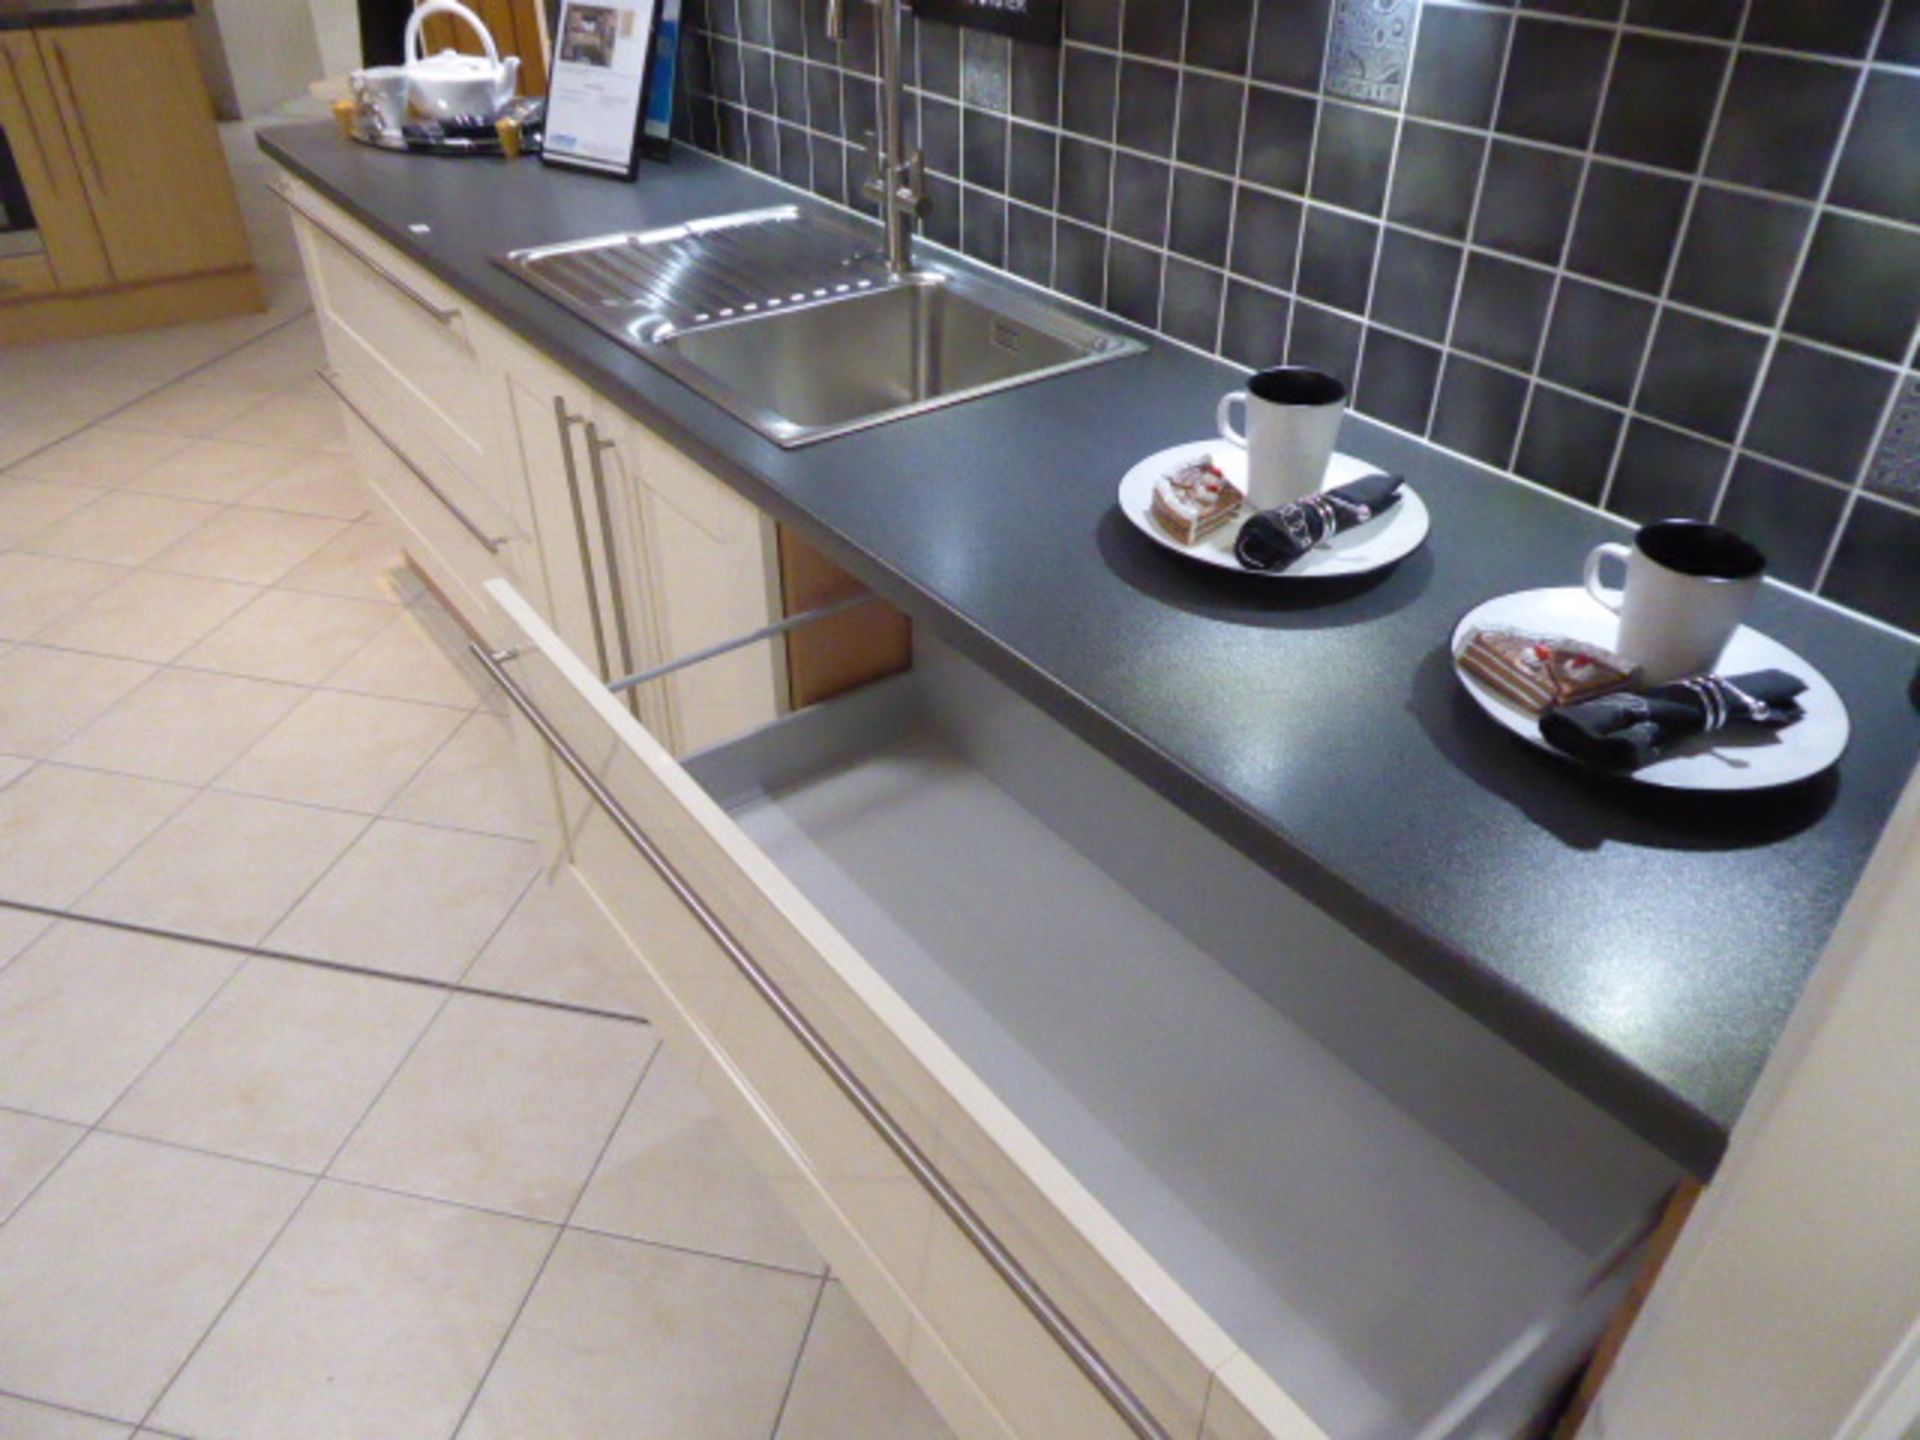 Décor Gloss Oyster kitchen with a grey granite effect worktop in single run galley. Max dimension - Image 5 of 7